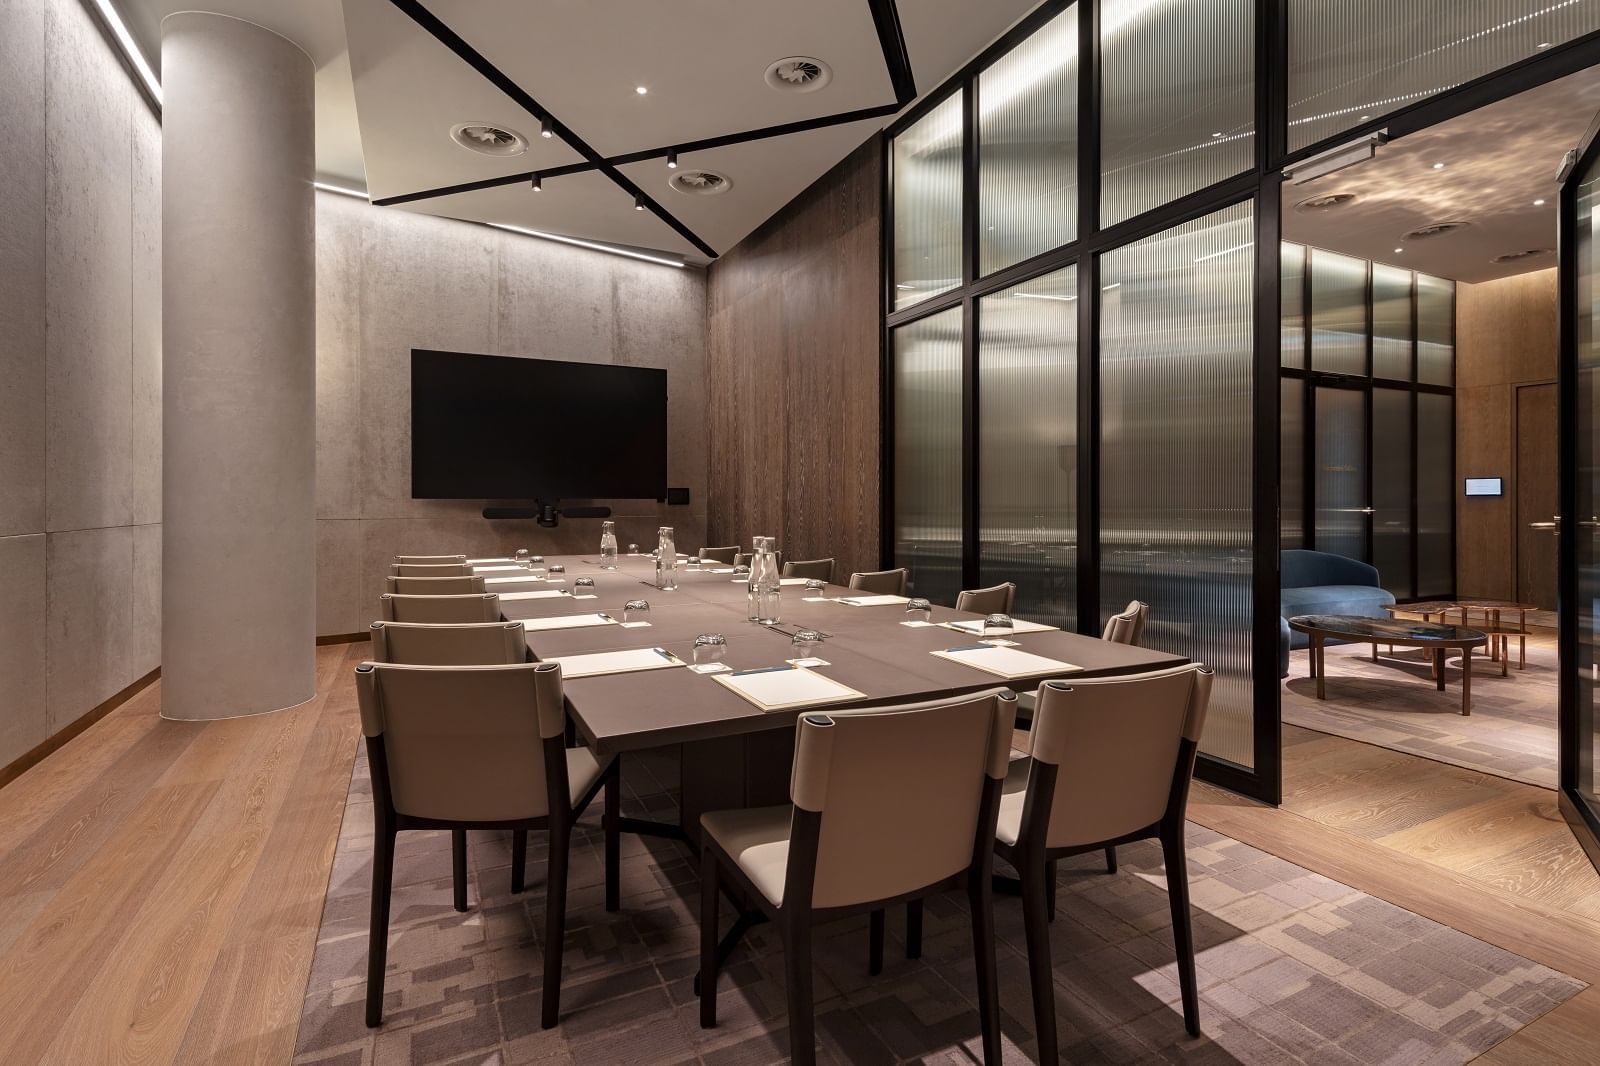 Concept design of a Meeting room at The Londoner Hotel